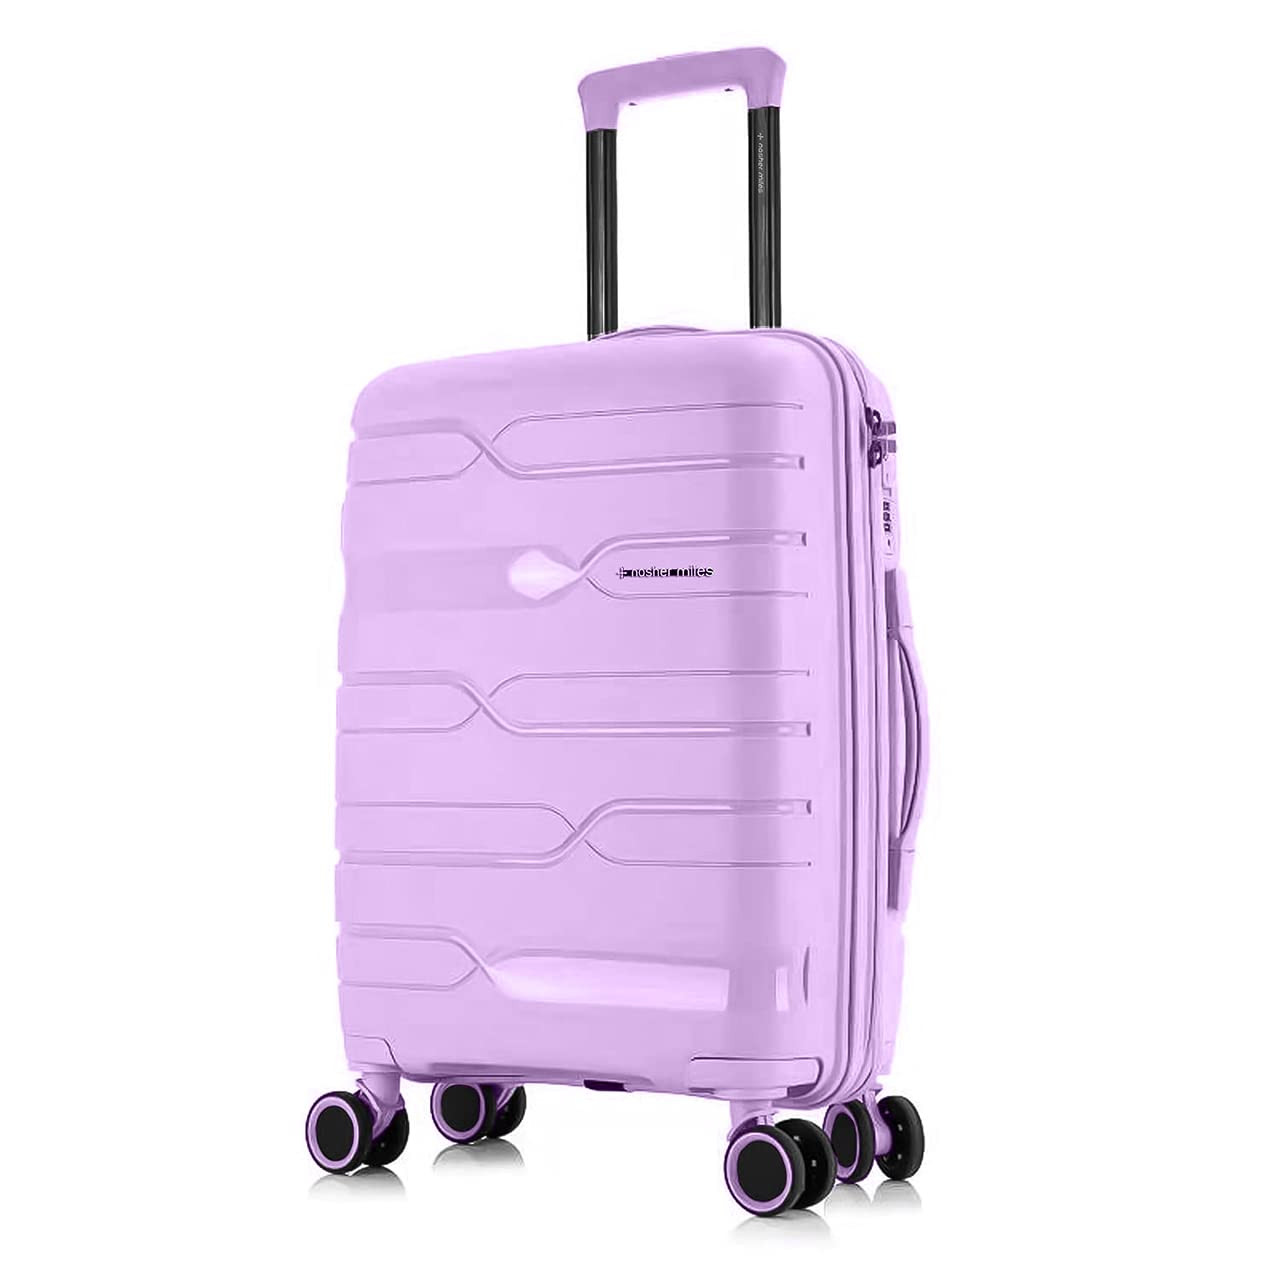 Medium Check-in Suitcase (65 cm) - Hardsided Polycarbonate Luggage Trolley  Bag - Pink Price in India, Full Specifications & Offers | DTashion.com